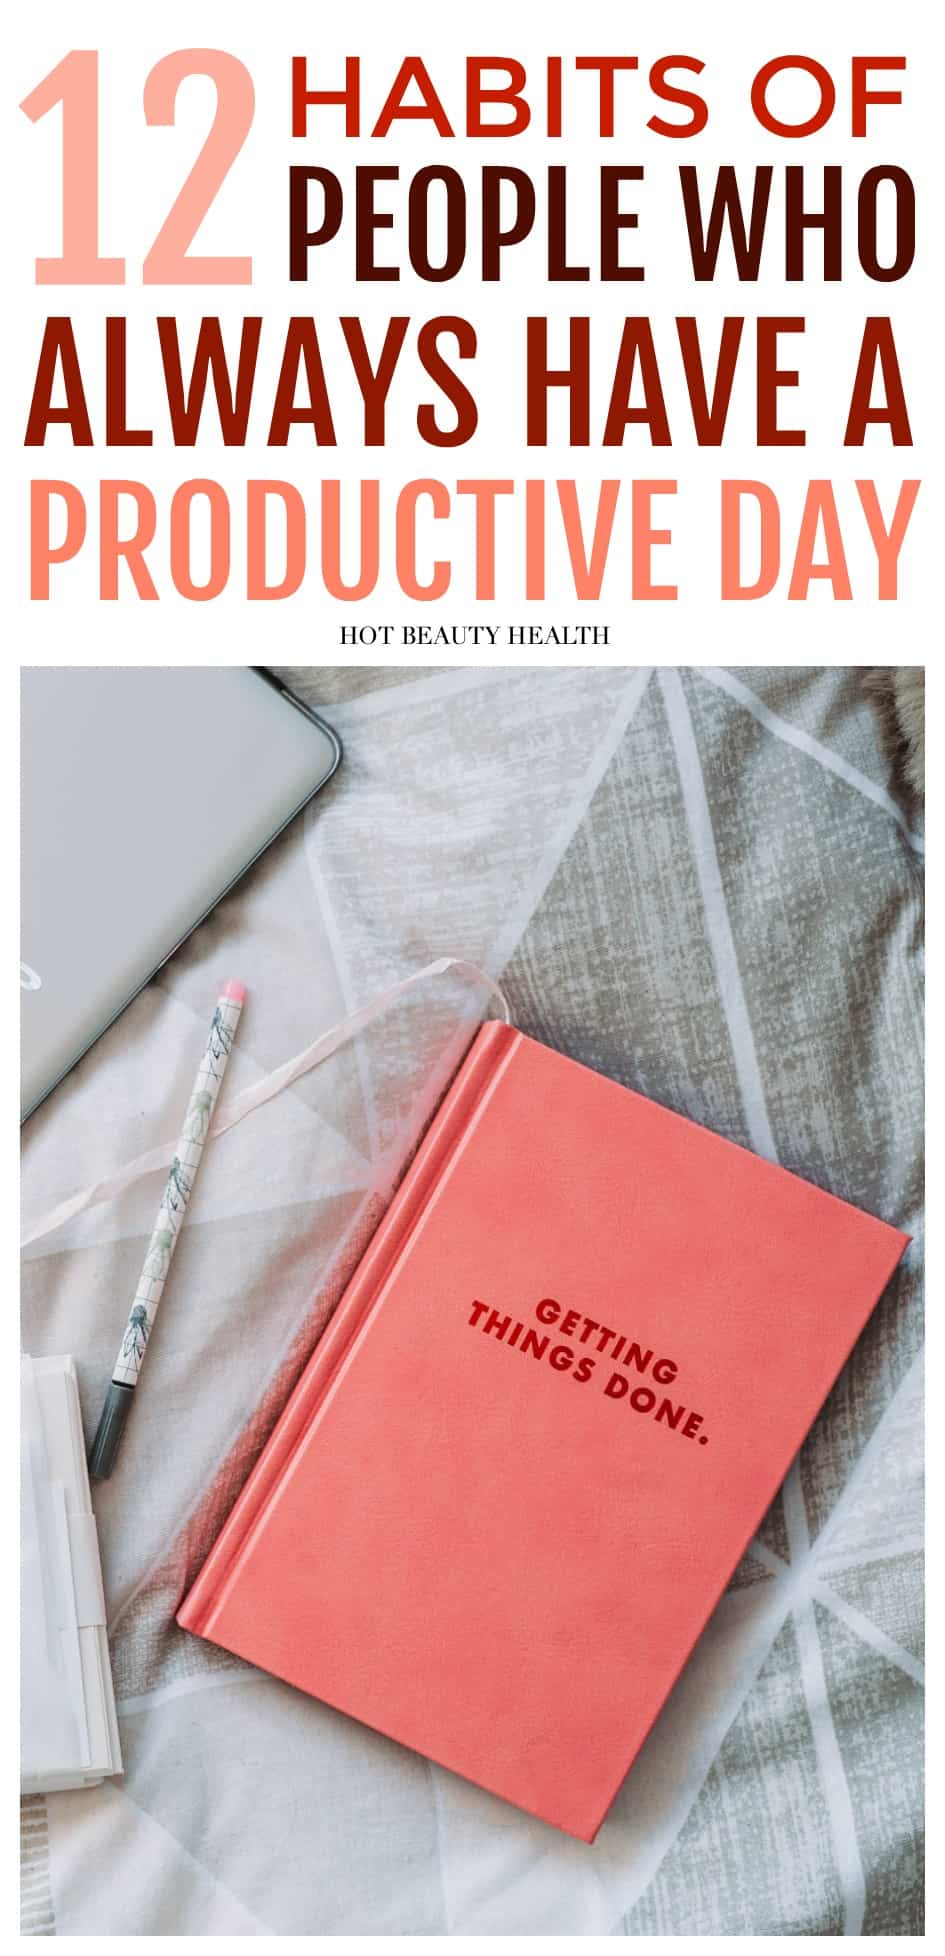 habits of productive people